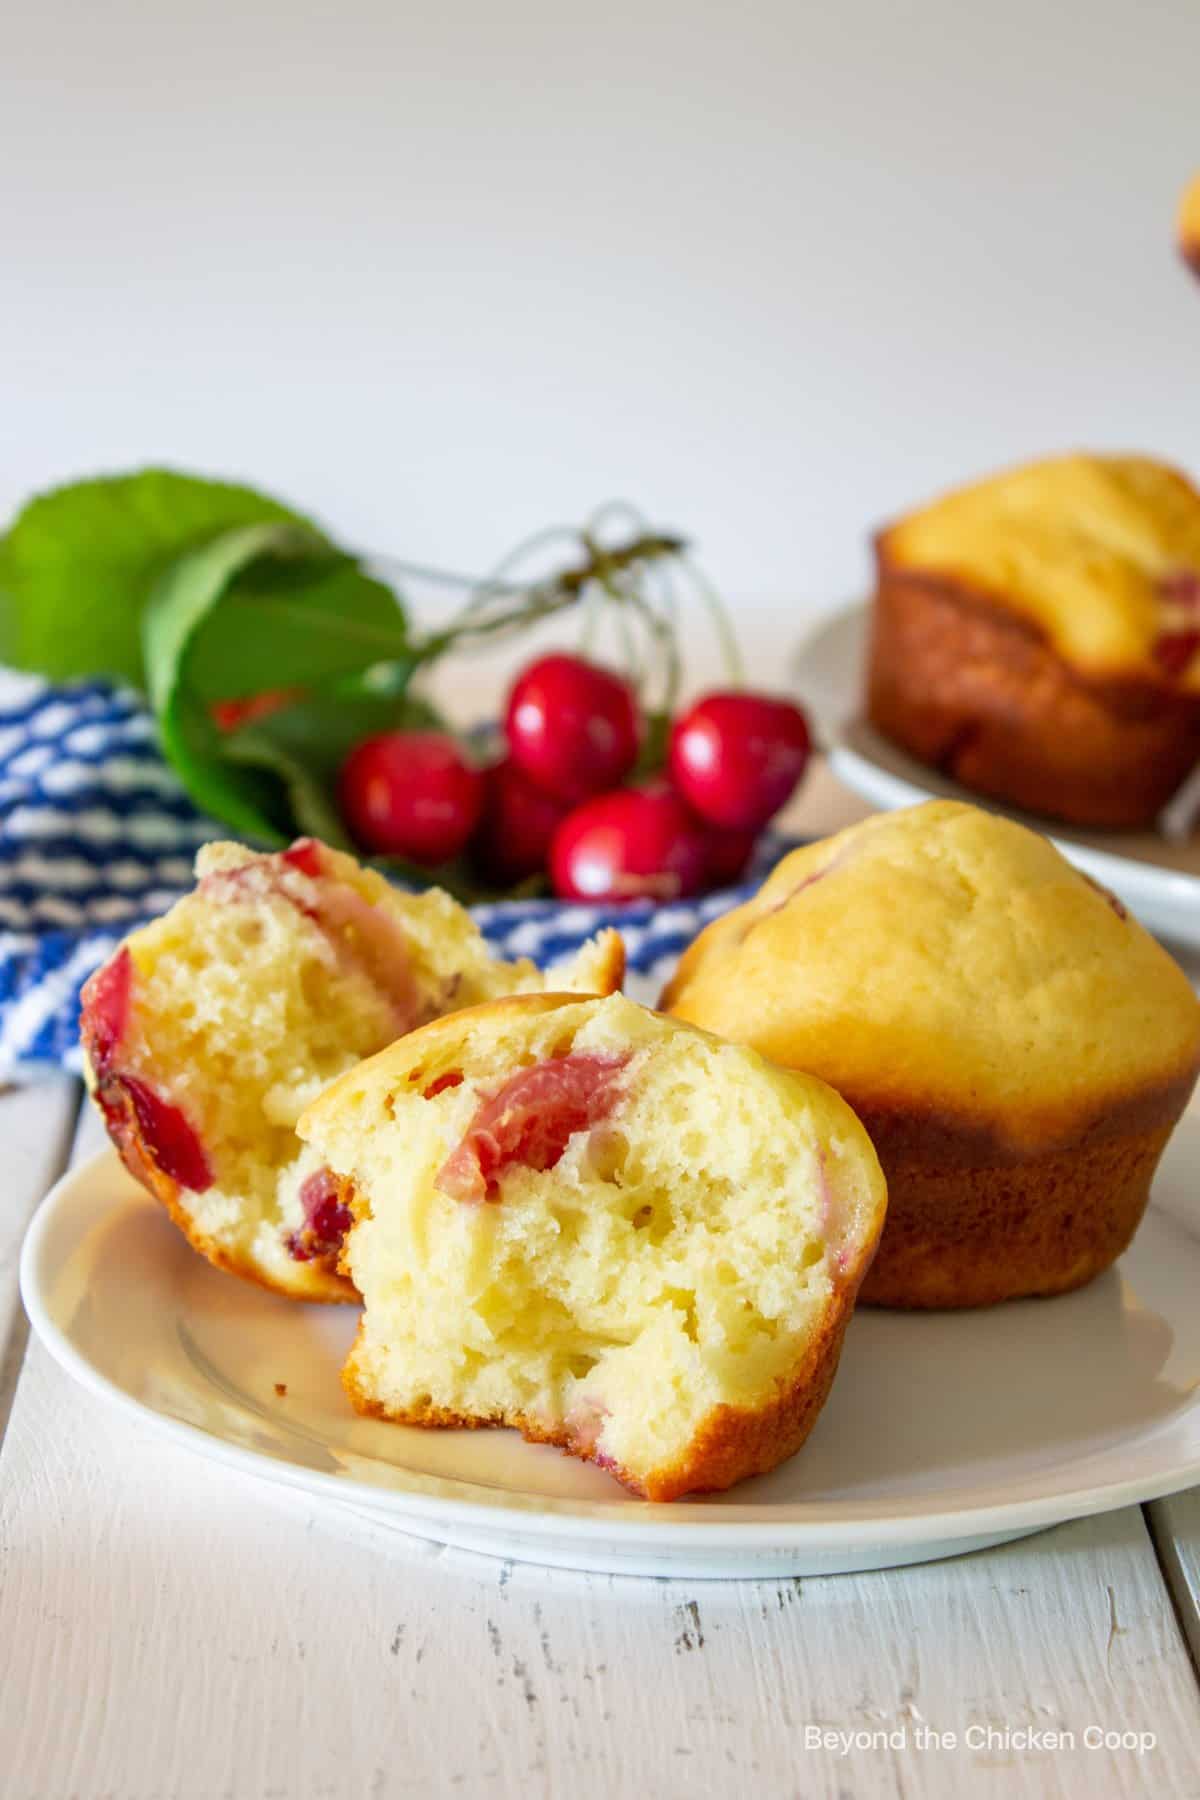 Muffins with cherries on a plate.